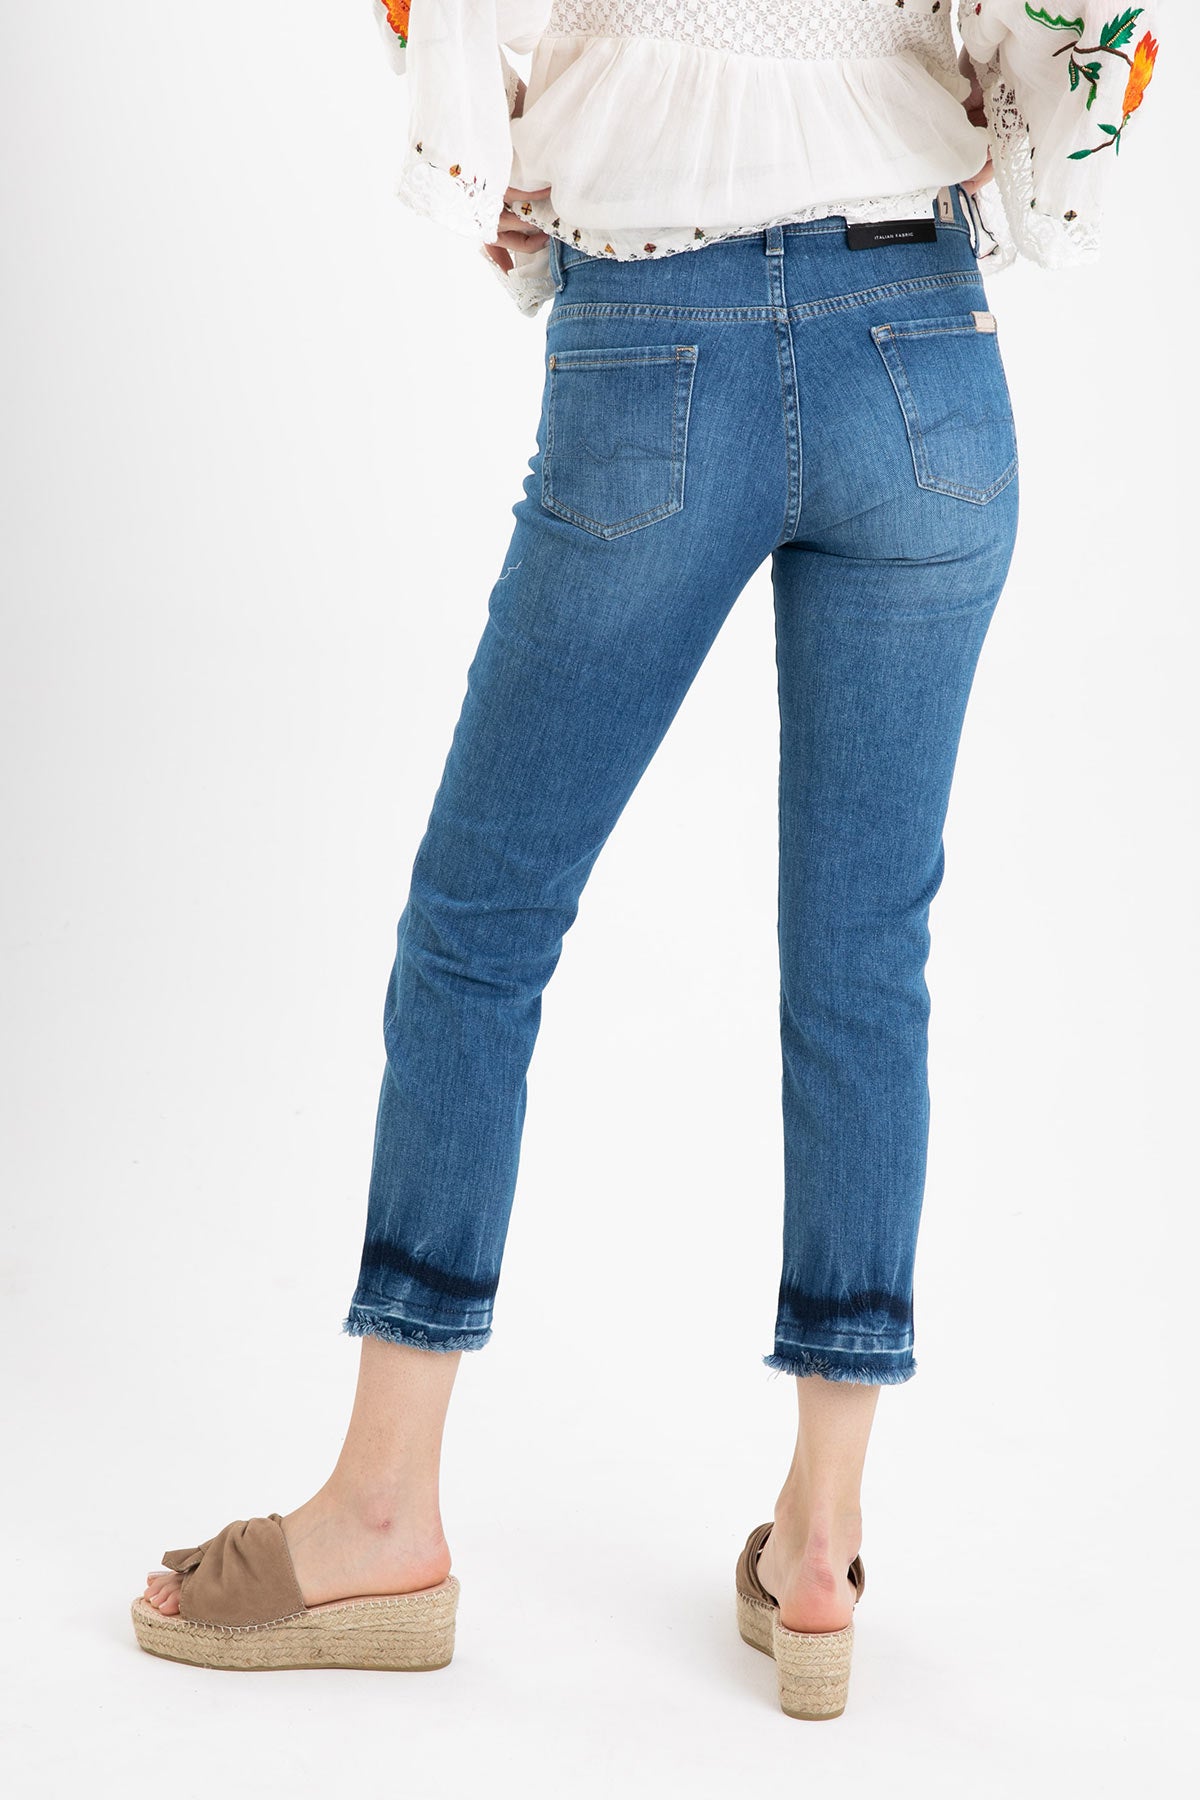 7 For All Mankind Roxanne Ankle Slim Fit Jeans-Libas Trendy Fashion Store